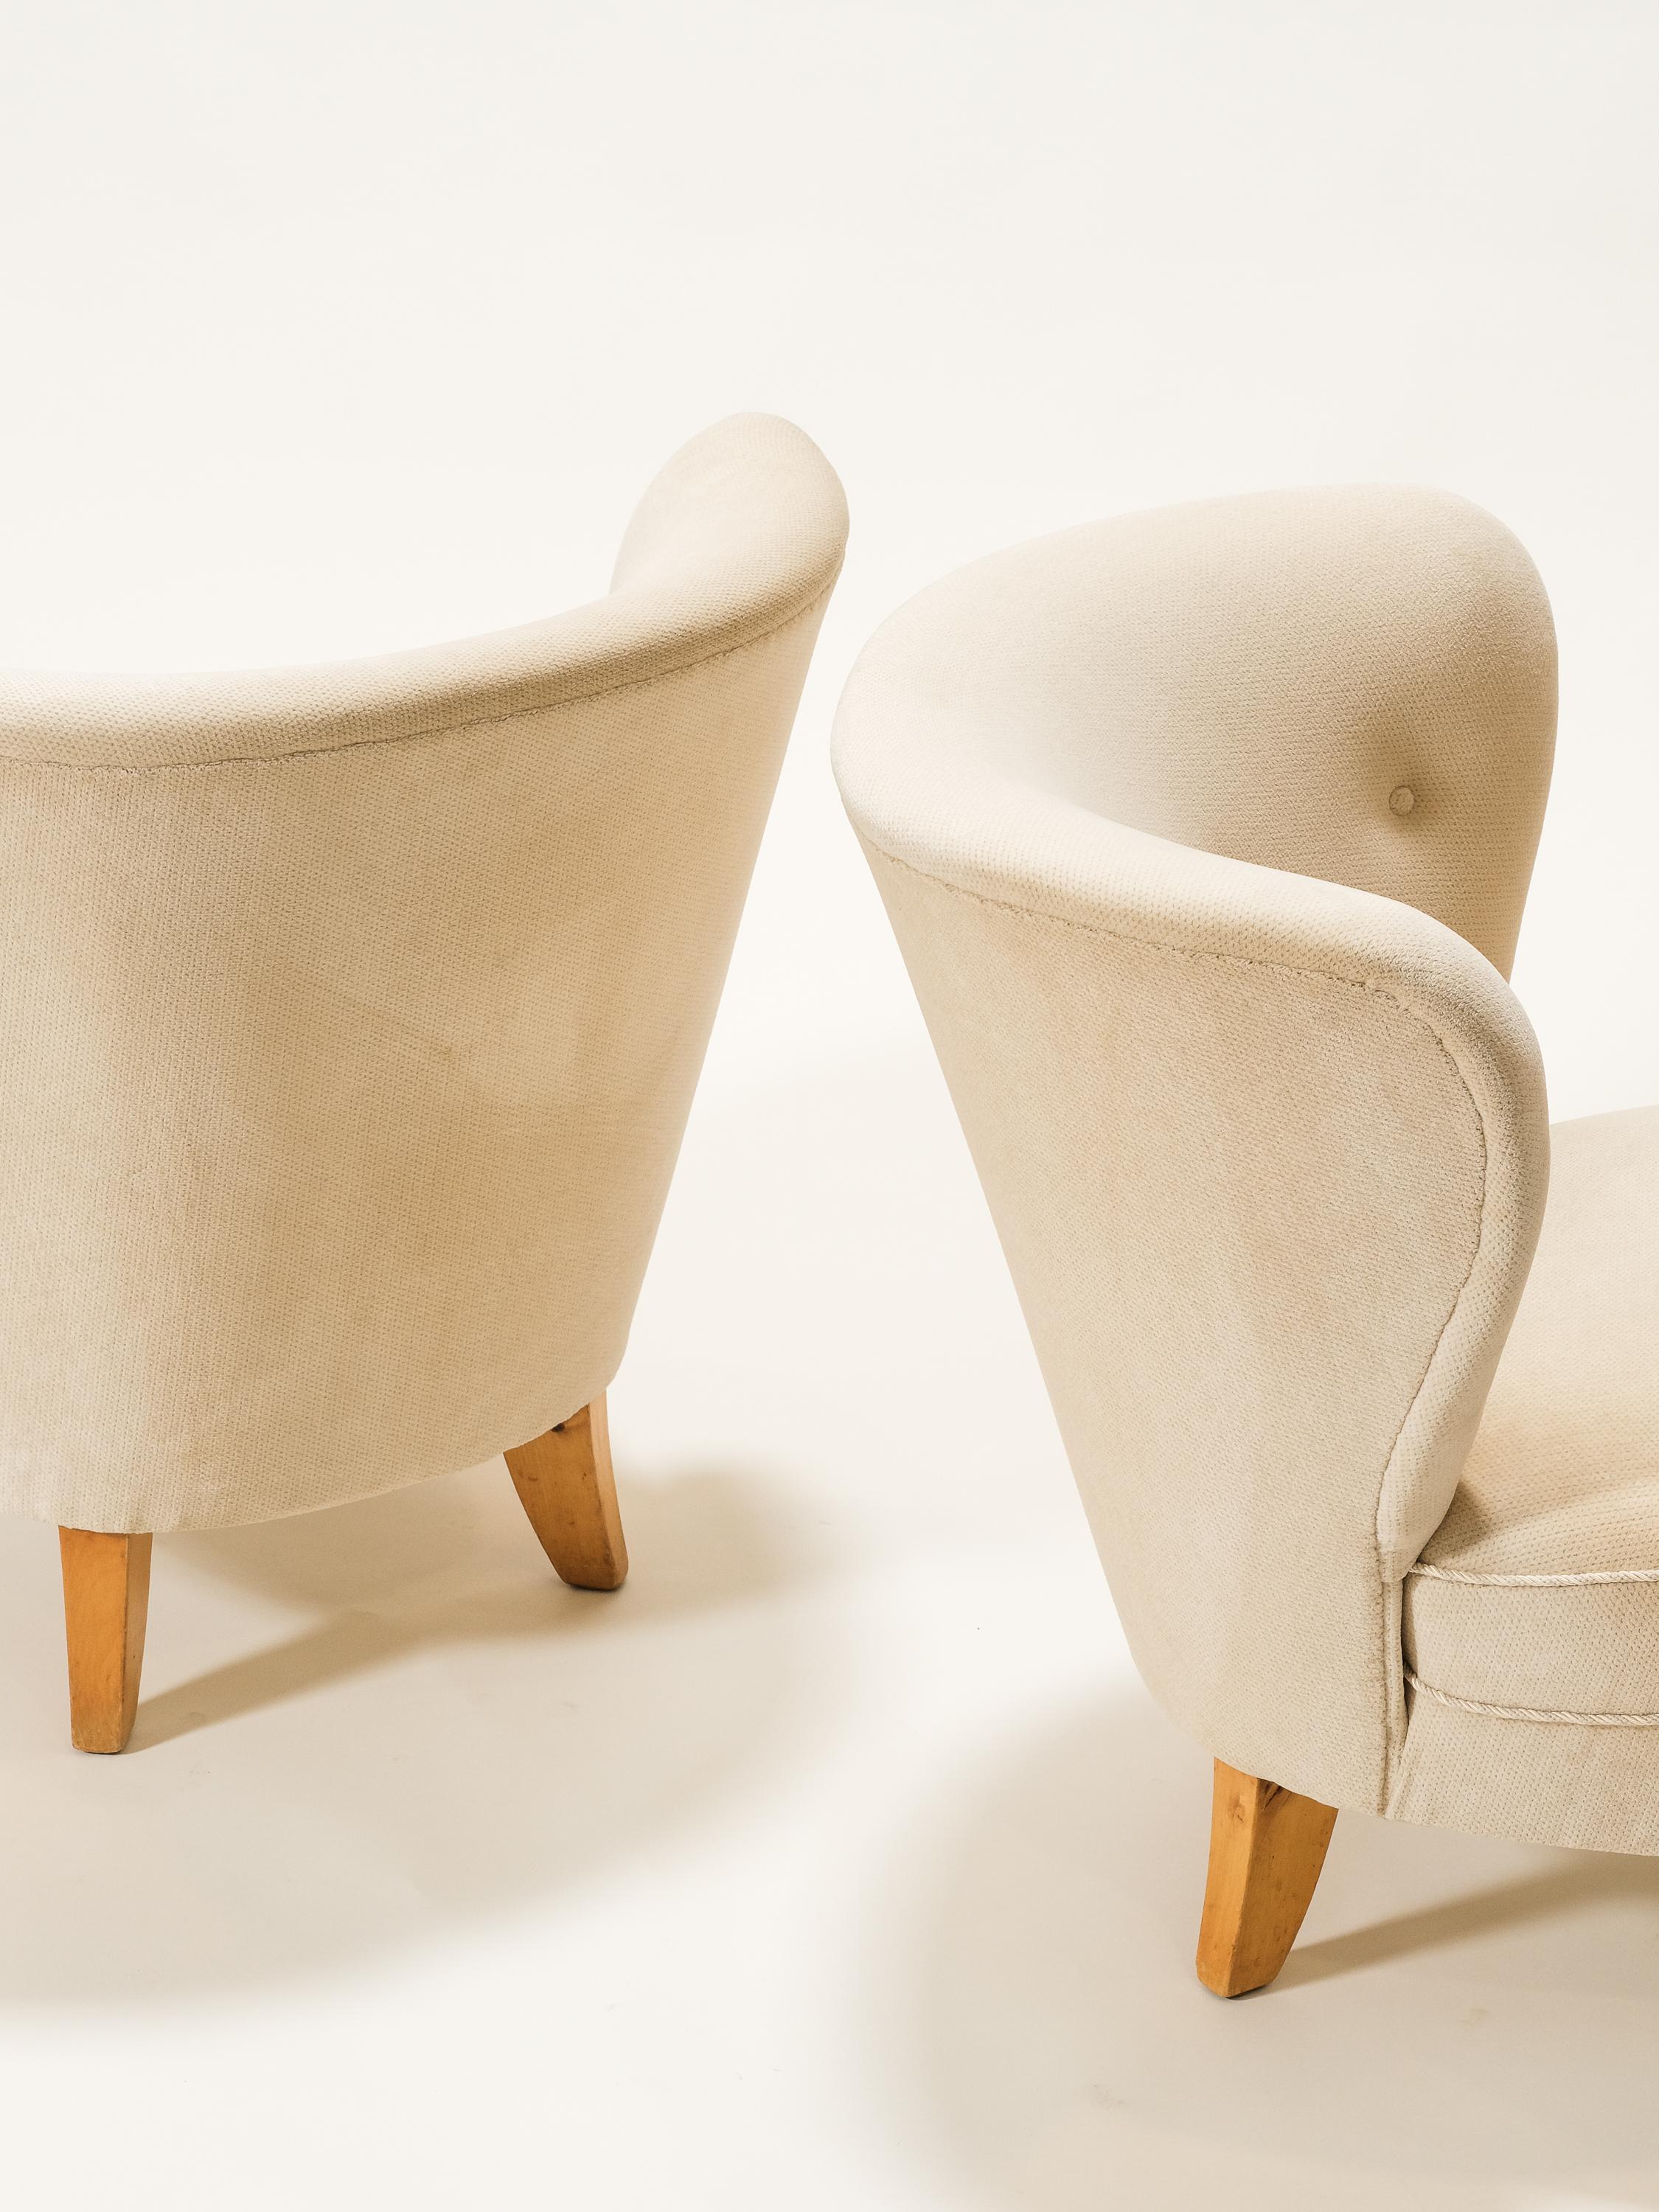 Pair of Mid-Century Easy Chairs, Finland, 1950s For Sale 6